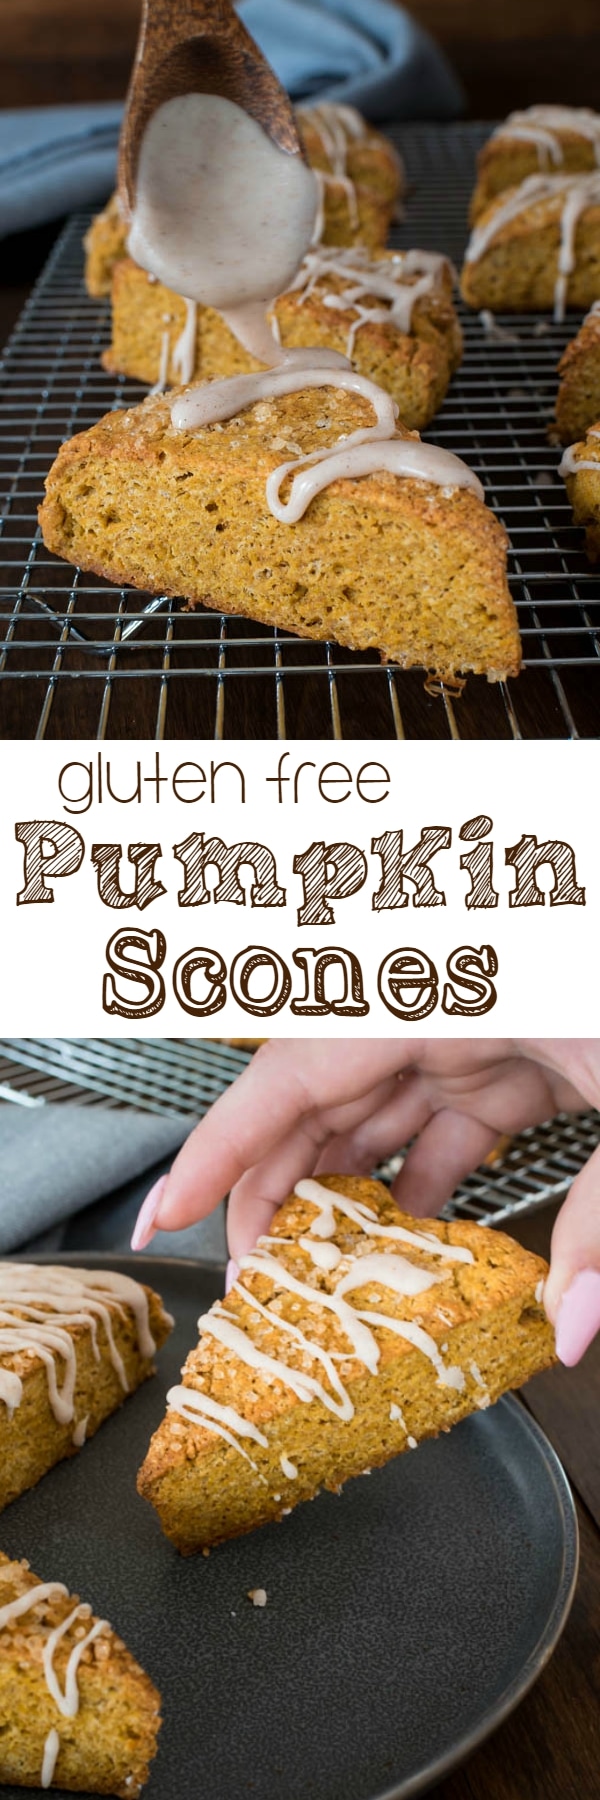 Similar to the seasonal scones offered at Starbucks, these light, fluffy gluten free Pumpkin Scones are filled with the moisture of pumpkin, and the beautiful, comforting aroma of pumpkin pie spice.